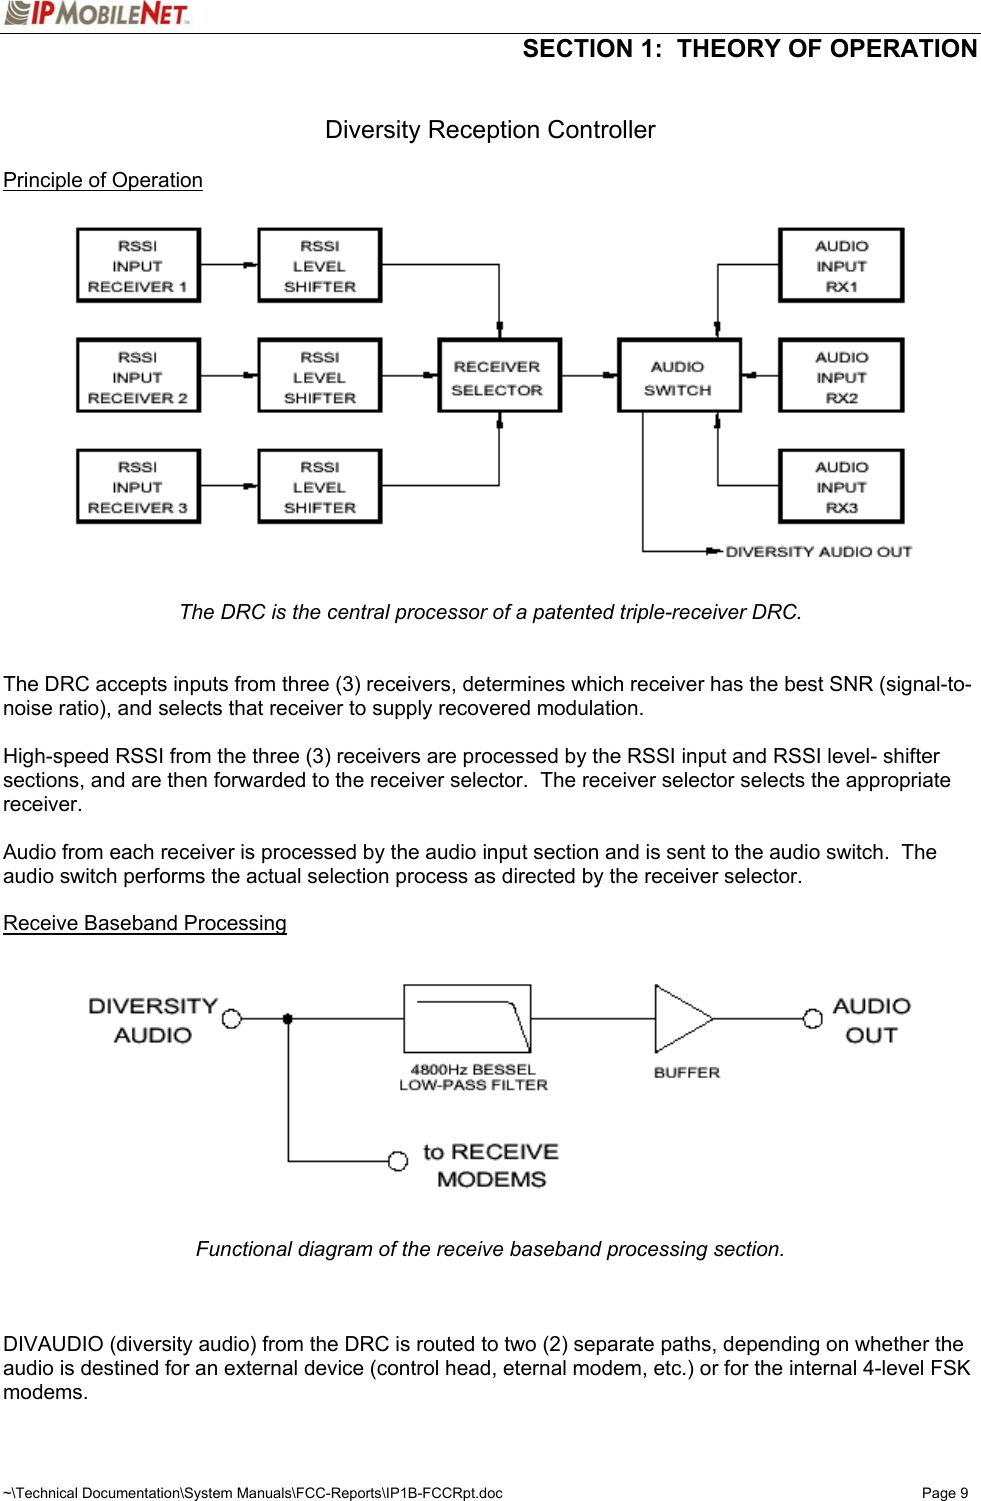  SECTION 1:  THEORY OF OPERATION  ~\Technical Documentation\System Manuals\FCC-Reports\IP1B-FCCRpt.doc  Page 9  Diversity Reception Controller  Principle of Operation  The DRC is the central processor of a patented triple-receiver DRC.   The DRC accepts inputs from three (3) receivers, determines which receiver has the best SNR (signal-to-noise ratio), and selects that receiver to supply recovered modulation.  High-speed RSSI from the three (3) receivers are processed by the RSSI input and RSSI level- shifter sections, and are then forwarded to the receiver selector.  The receiver selector selects the appropriate receiver.  Audio from each receiver is processed by the audio input section and is sent to the audio switch.  The audio switch performs the actual selection process as directed by the receiver selector.  Receive Baseband Processing   Functional diagram of the receive baseband processing section.    DIVAUDIO (diversity audio) from the DRC is routed to two (2) separate paths, depending on whether the audio is destined for an external device (control head, eternal modem, etc.) or for the internal 4-level FSK modems. 